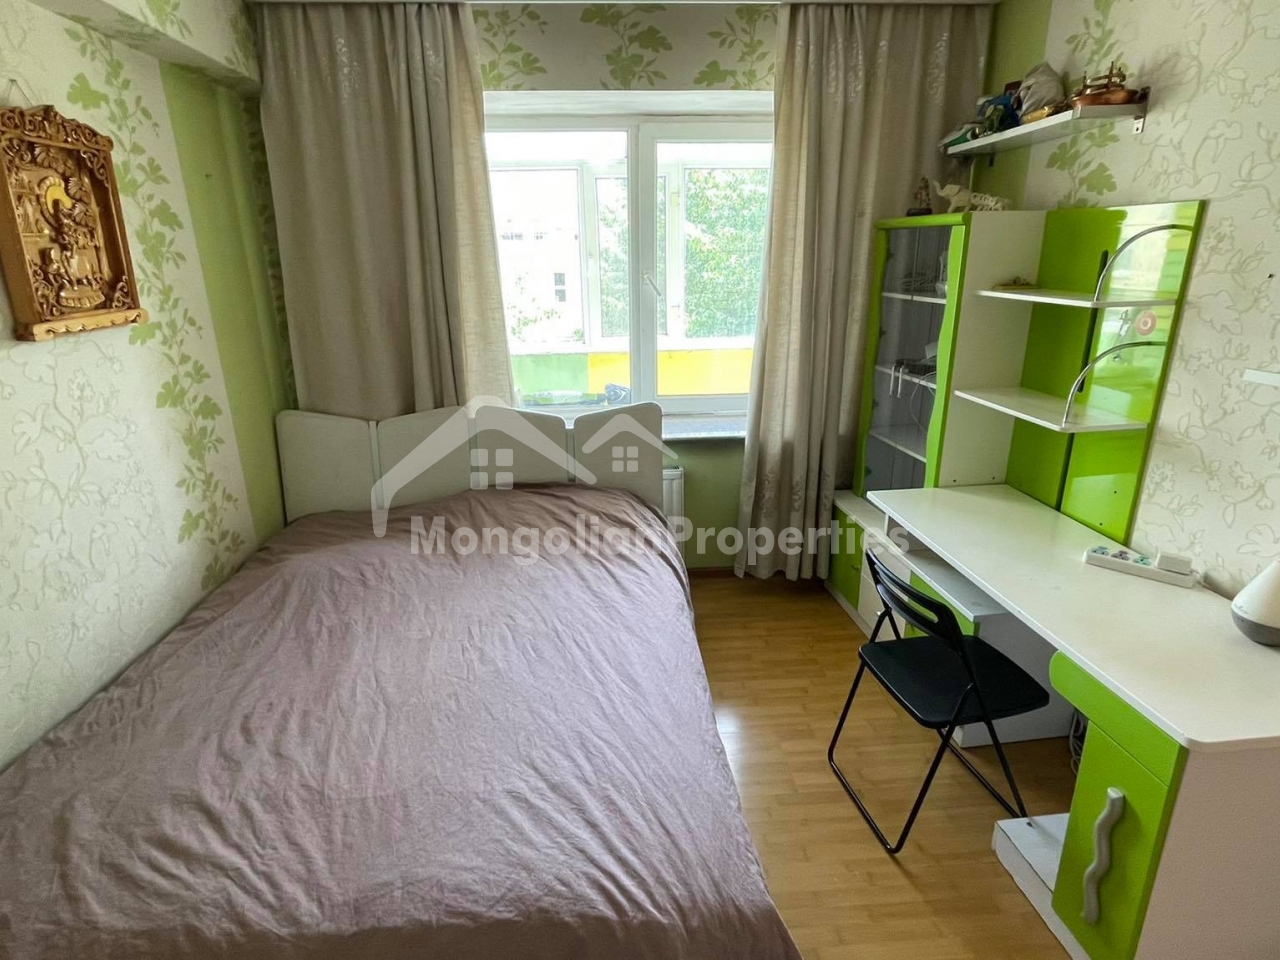 For rent : One bedroom near by Department store 